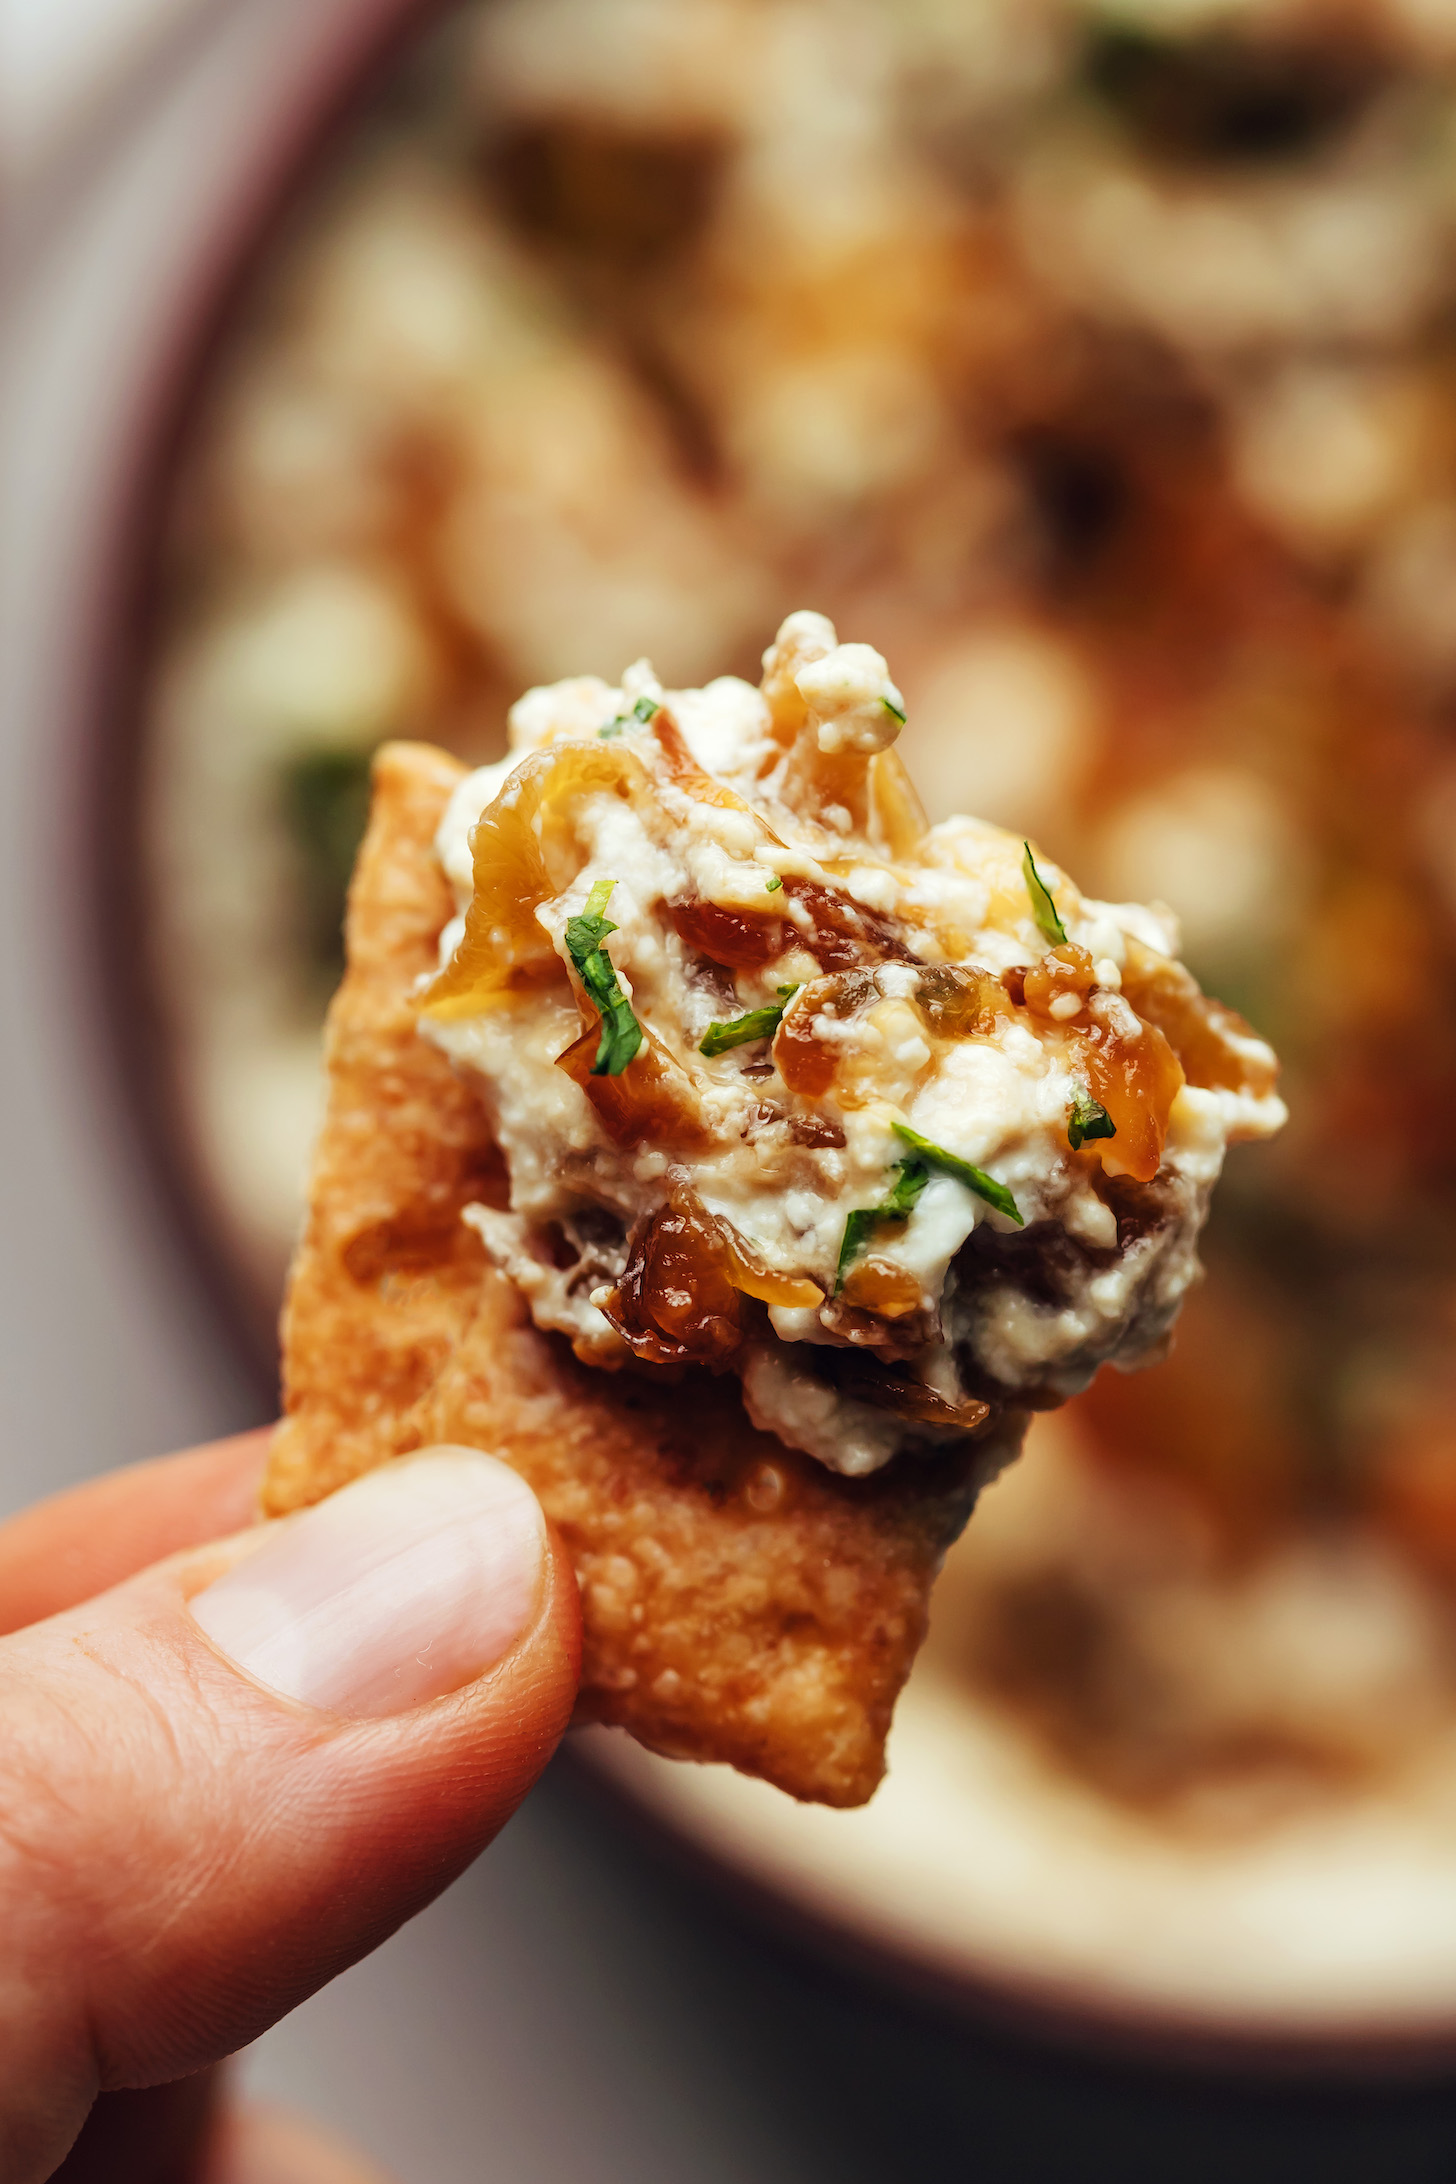 Holding up a cracker topped with caramelized onion dip